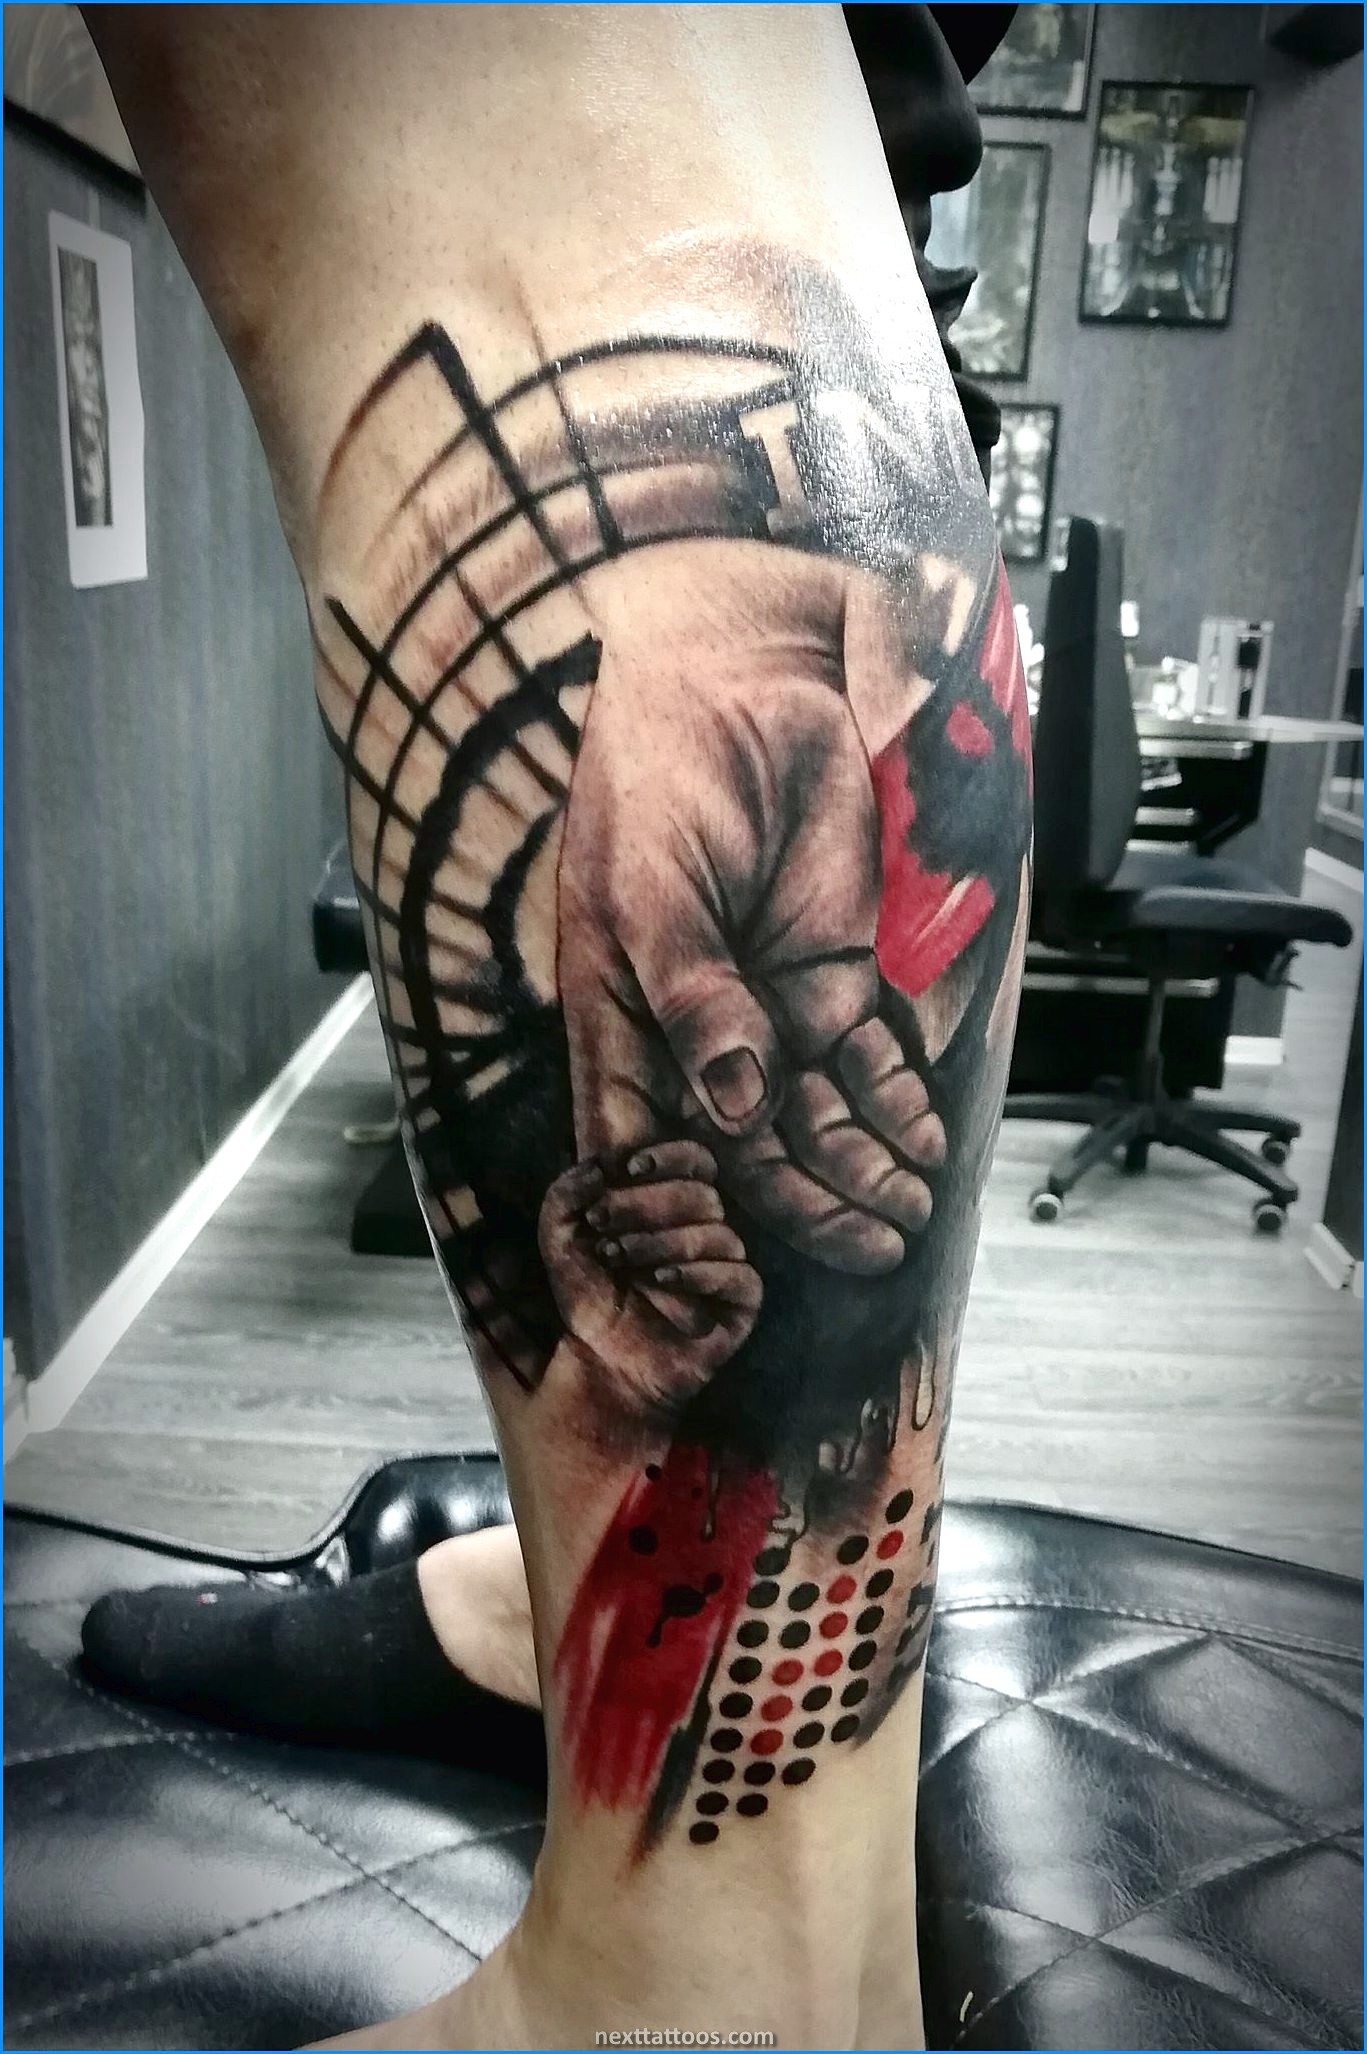 How to Get to Next Level Tattoo Costi in Bucharest